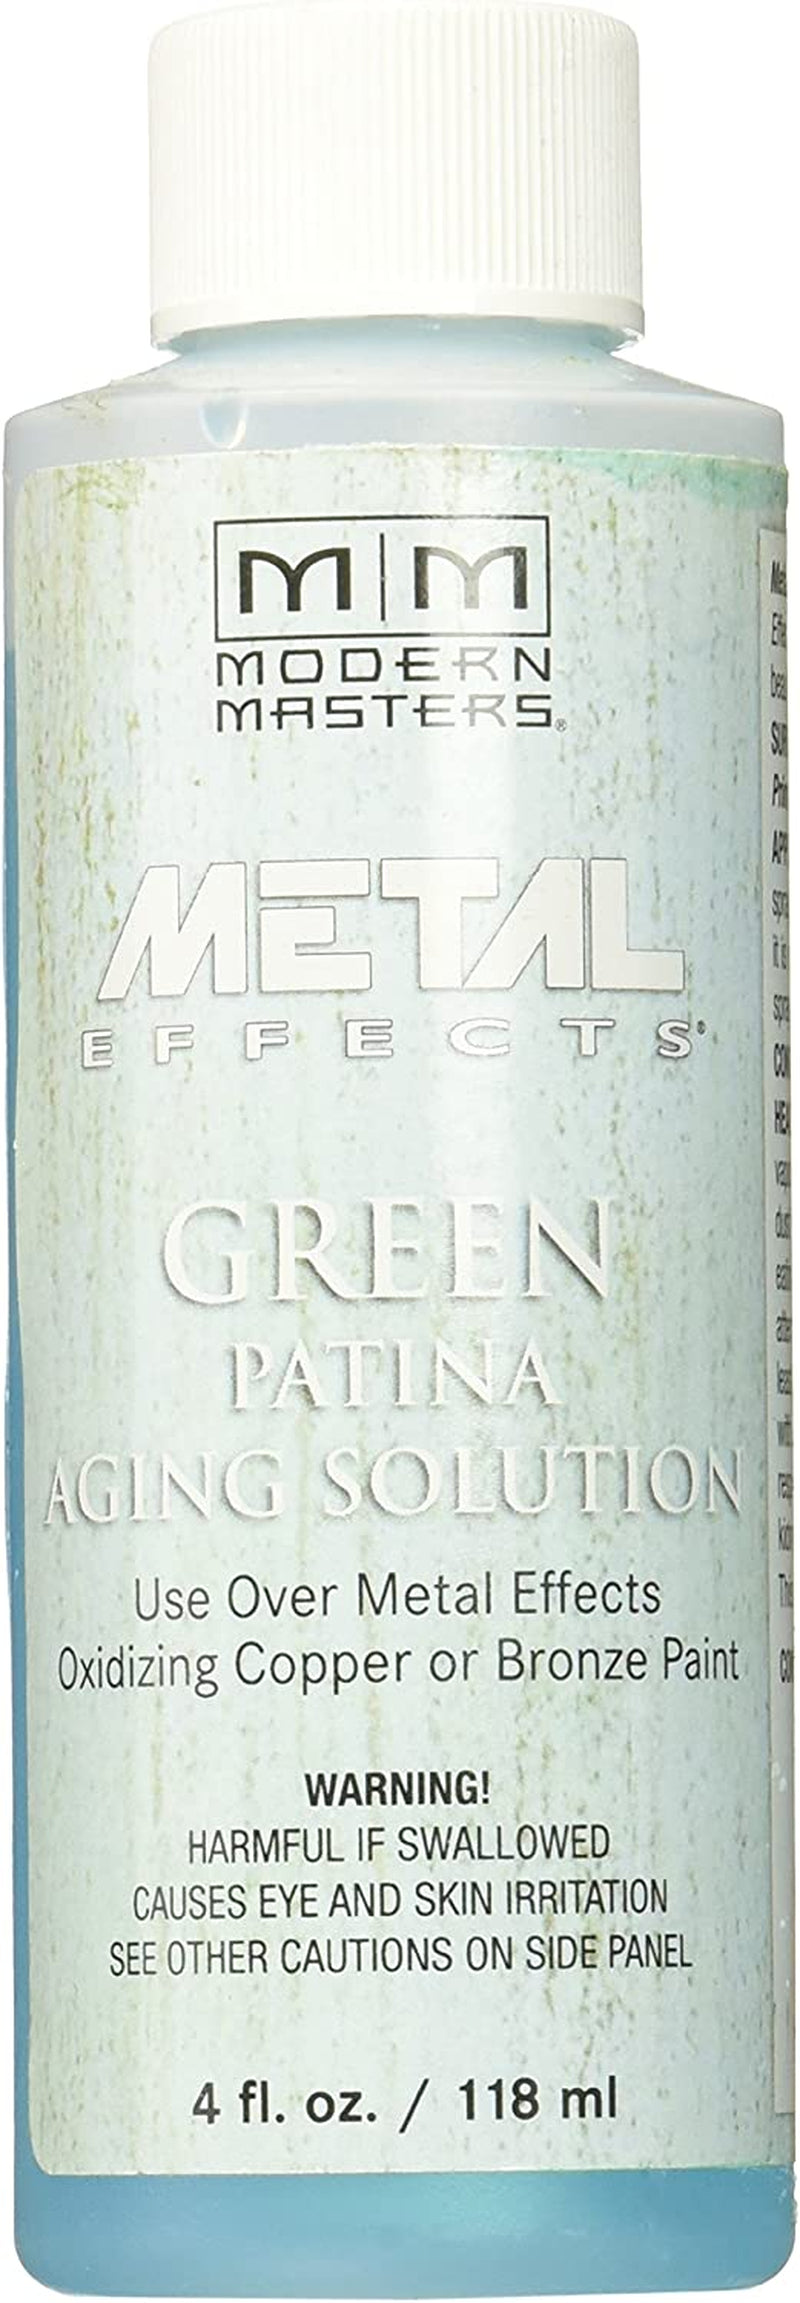 Modern Masters, 1 Pt Modern Masters PA901 Green Metal Effects Aging Solution